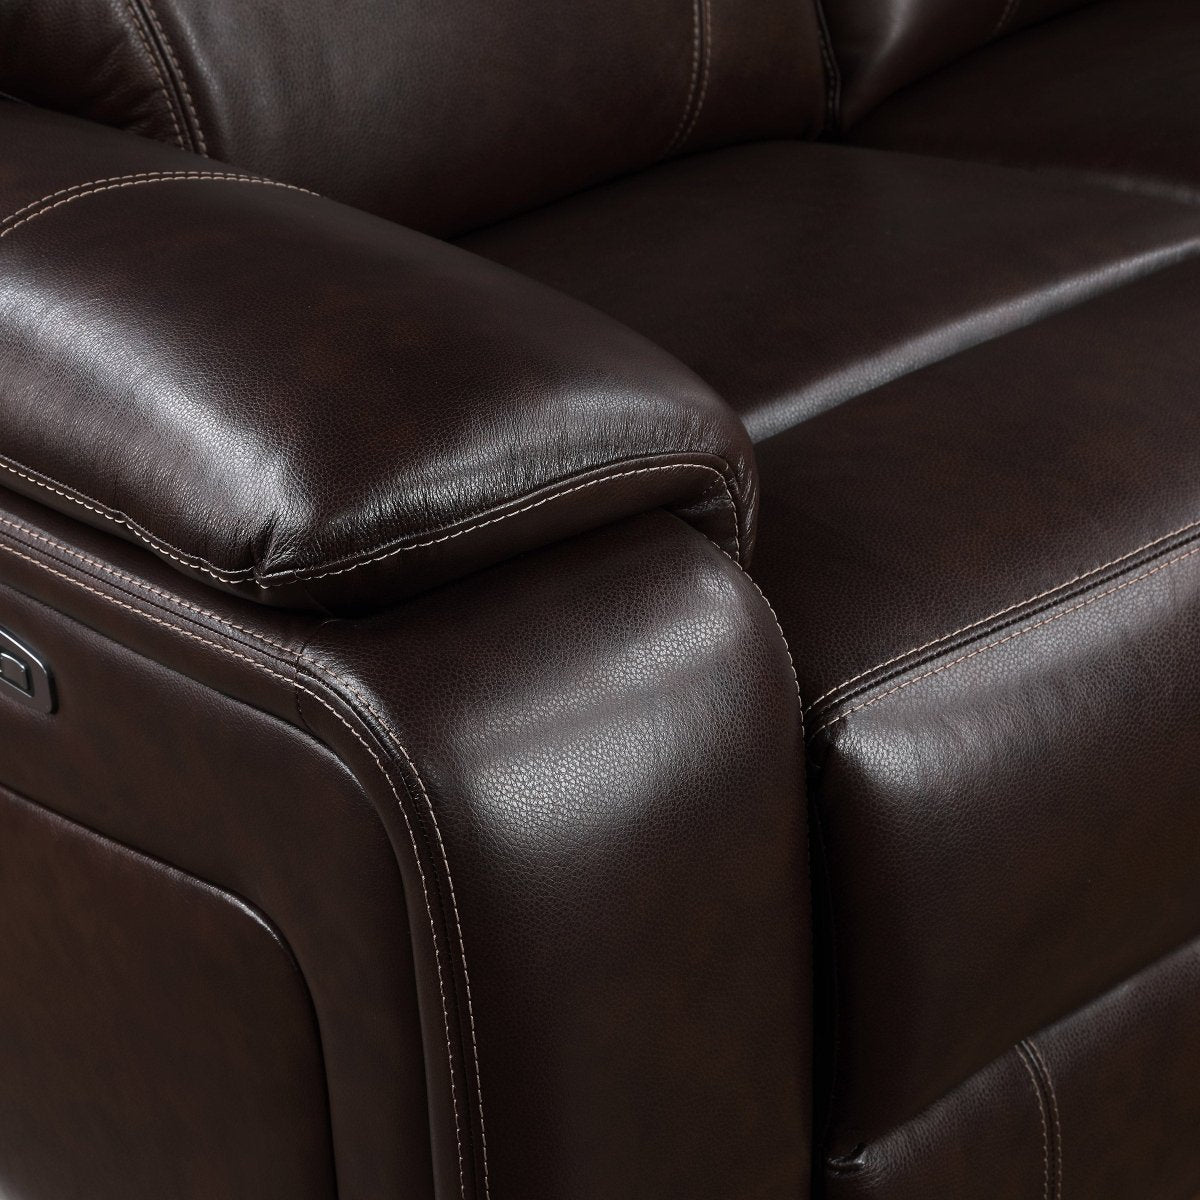 Fallon Leather Power Reclining Sofa with Power Headrests - Alpine Outlets